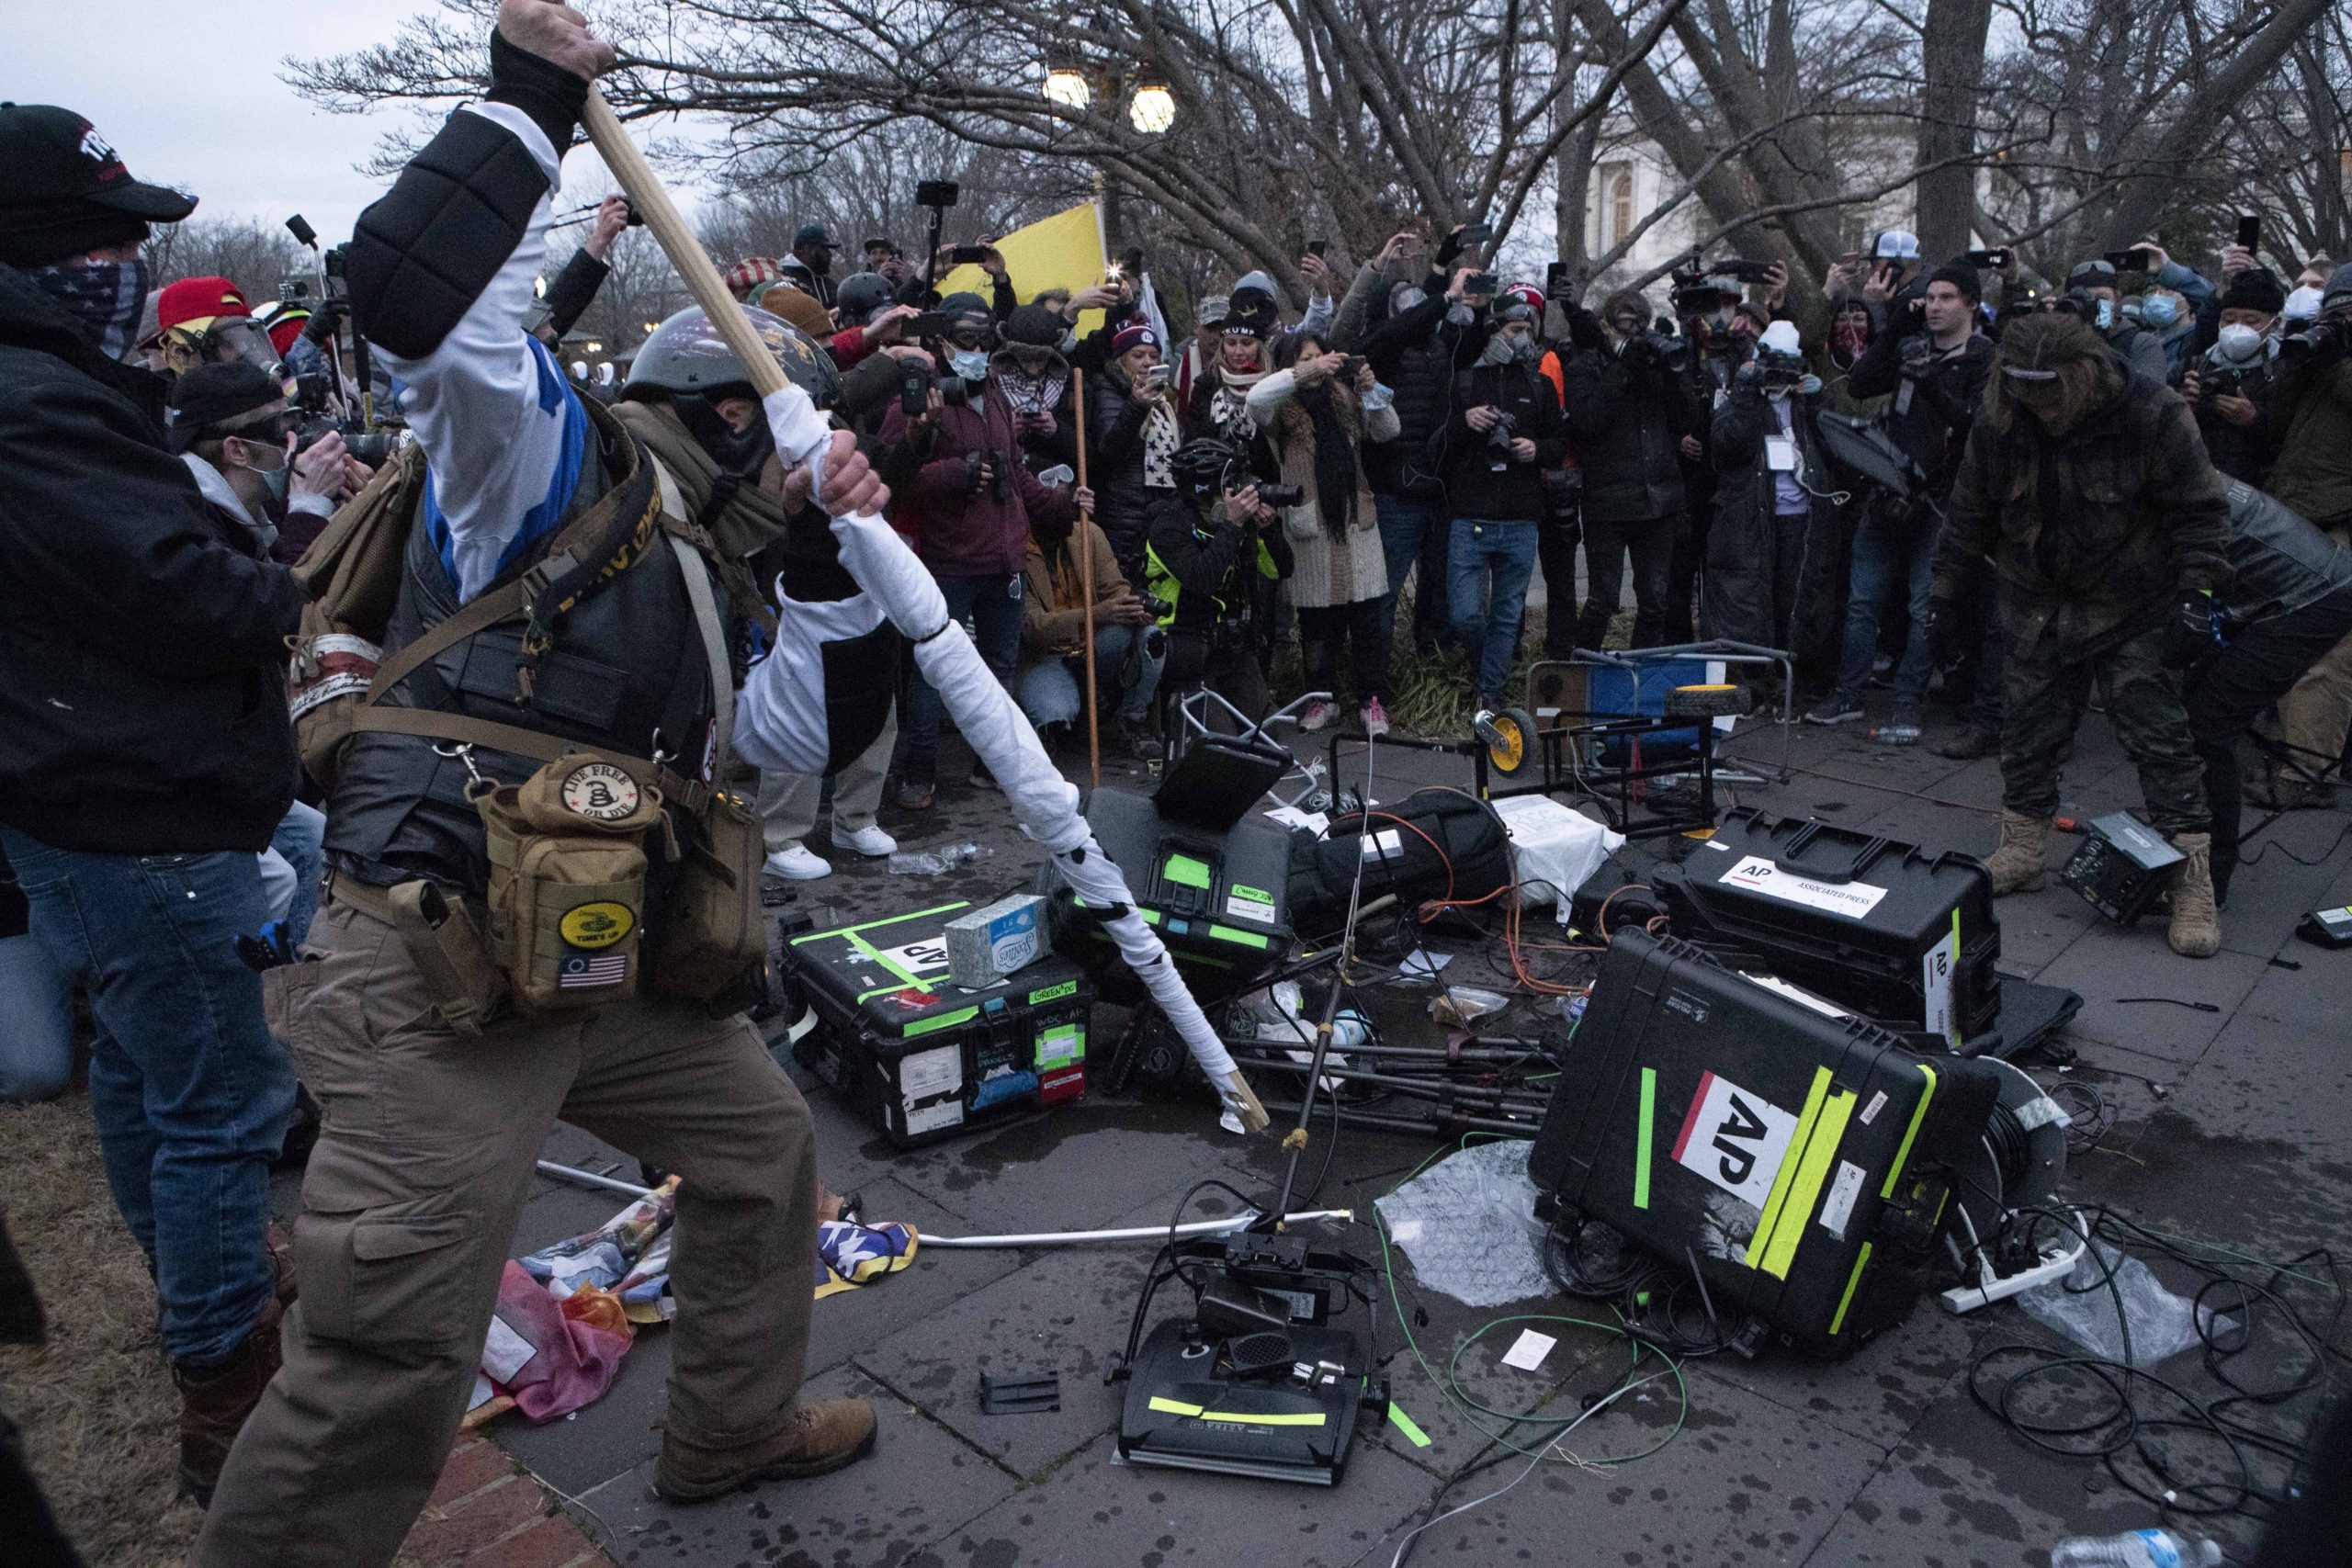 A circle of people gather around a pile of destroyed Associated Press TV equipment. To the left, a man in a helmet, a vest, and camo gear strikes a long wooden pole into the equipment